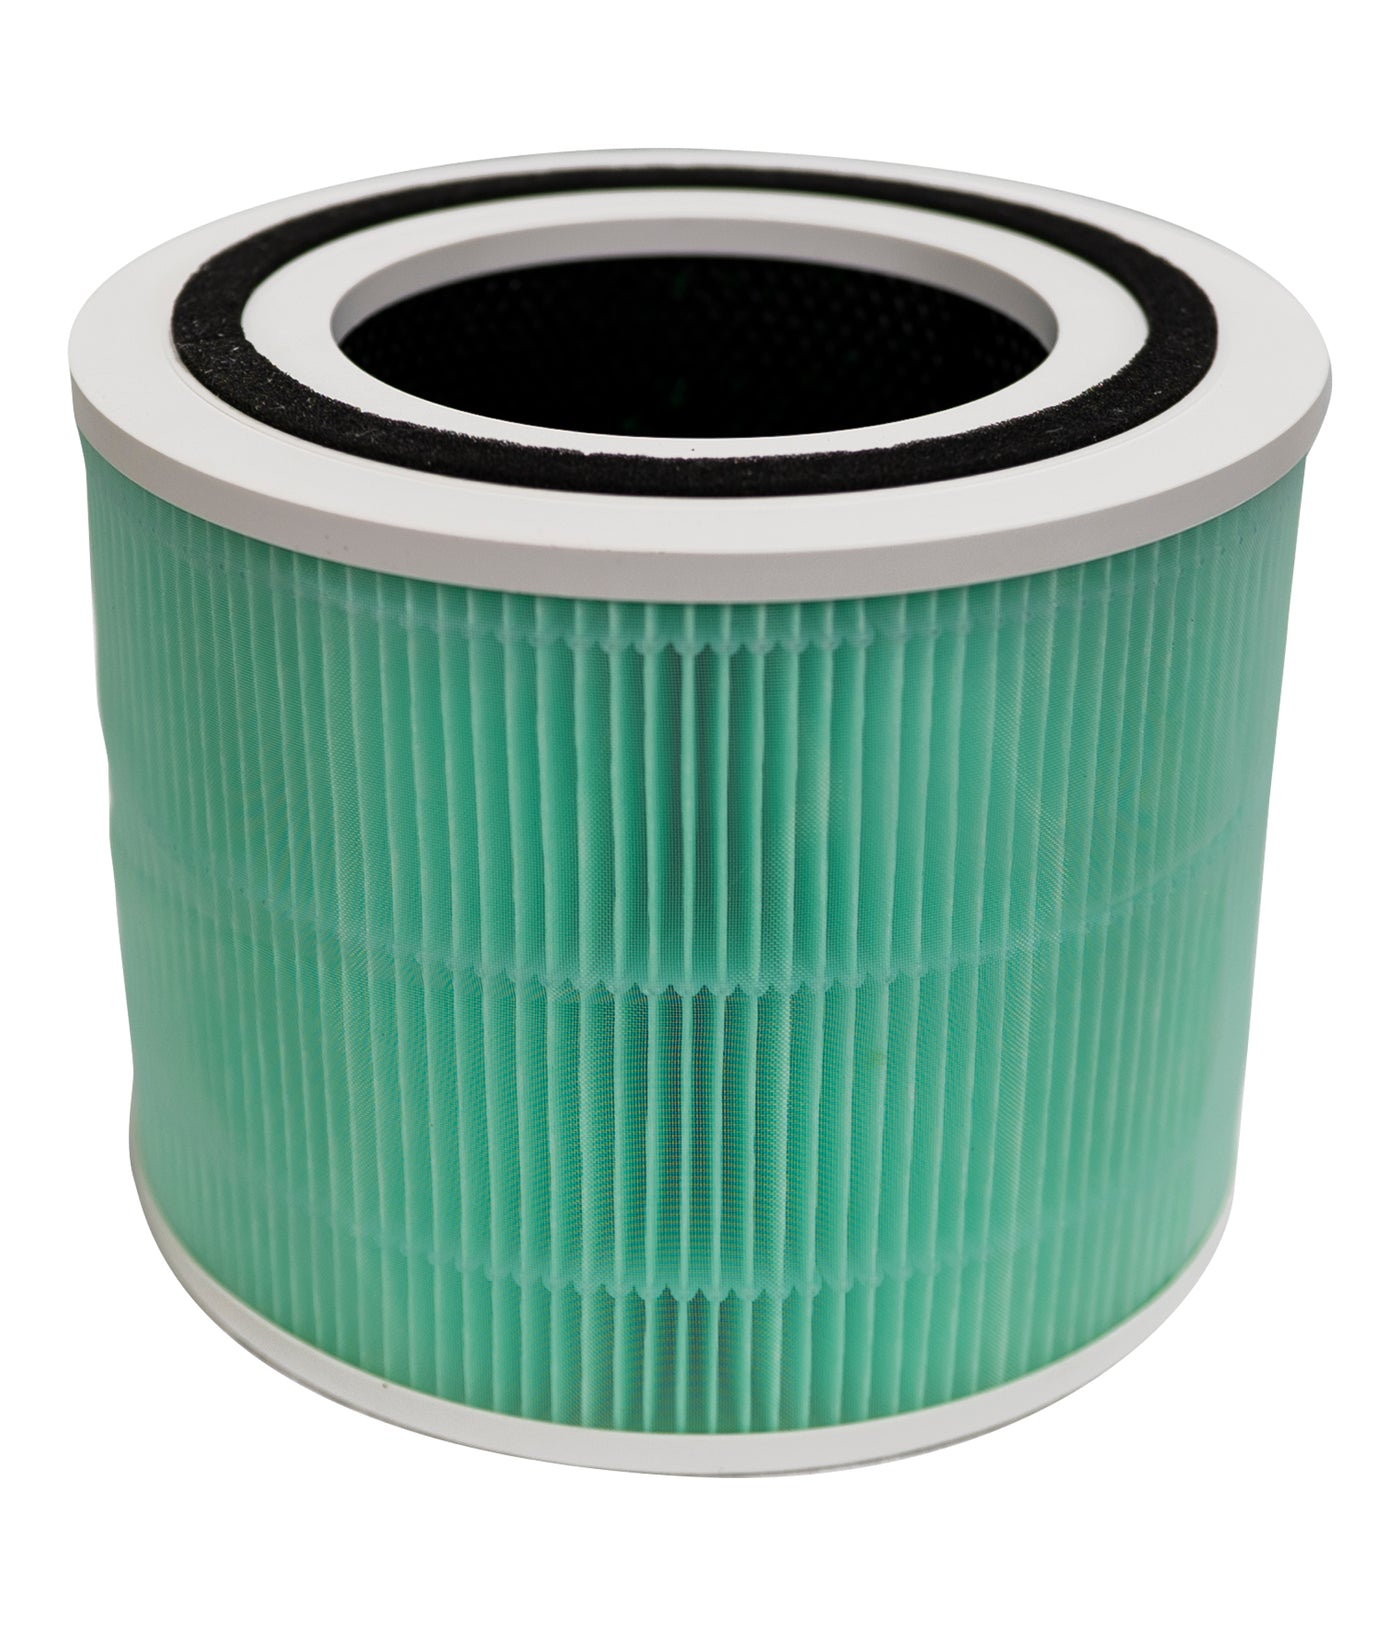 Filter-Monster 3-in-1 True HEPA replacement filter for Levoit Core 300